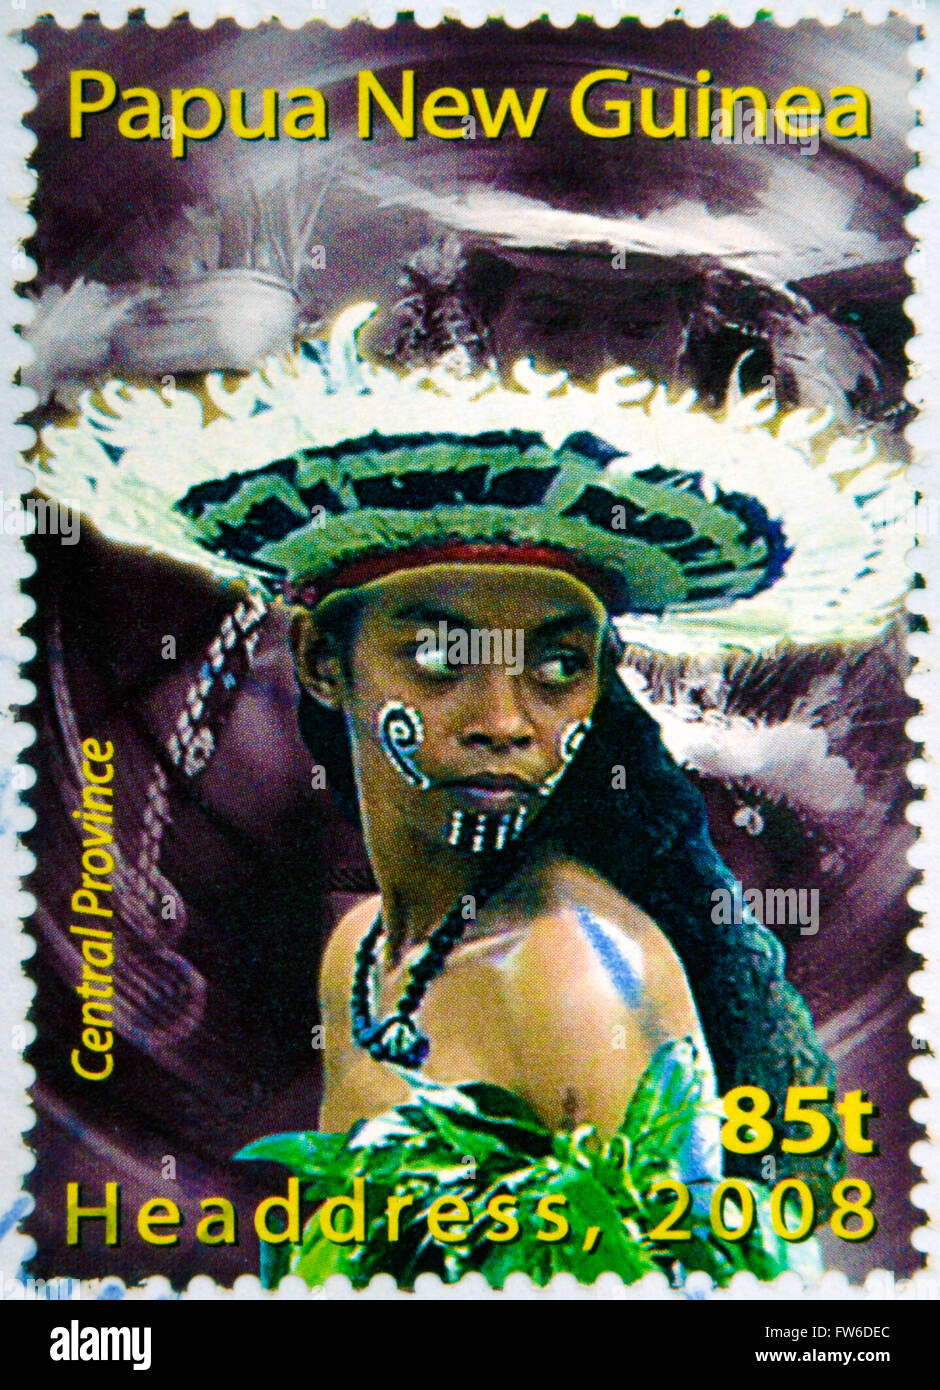 PAPUA NEW GUINEA - CIRCA 2000: Stamp printed in Papua New Guinea shows a woman in a feathered headdress Stock Photo